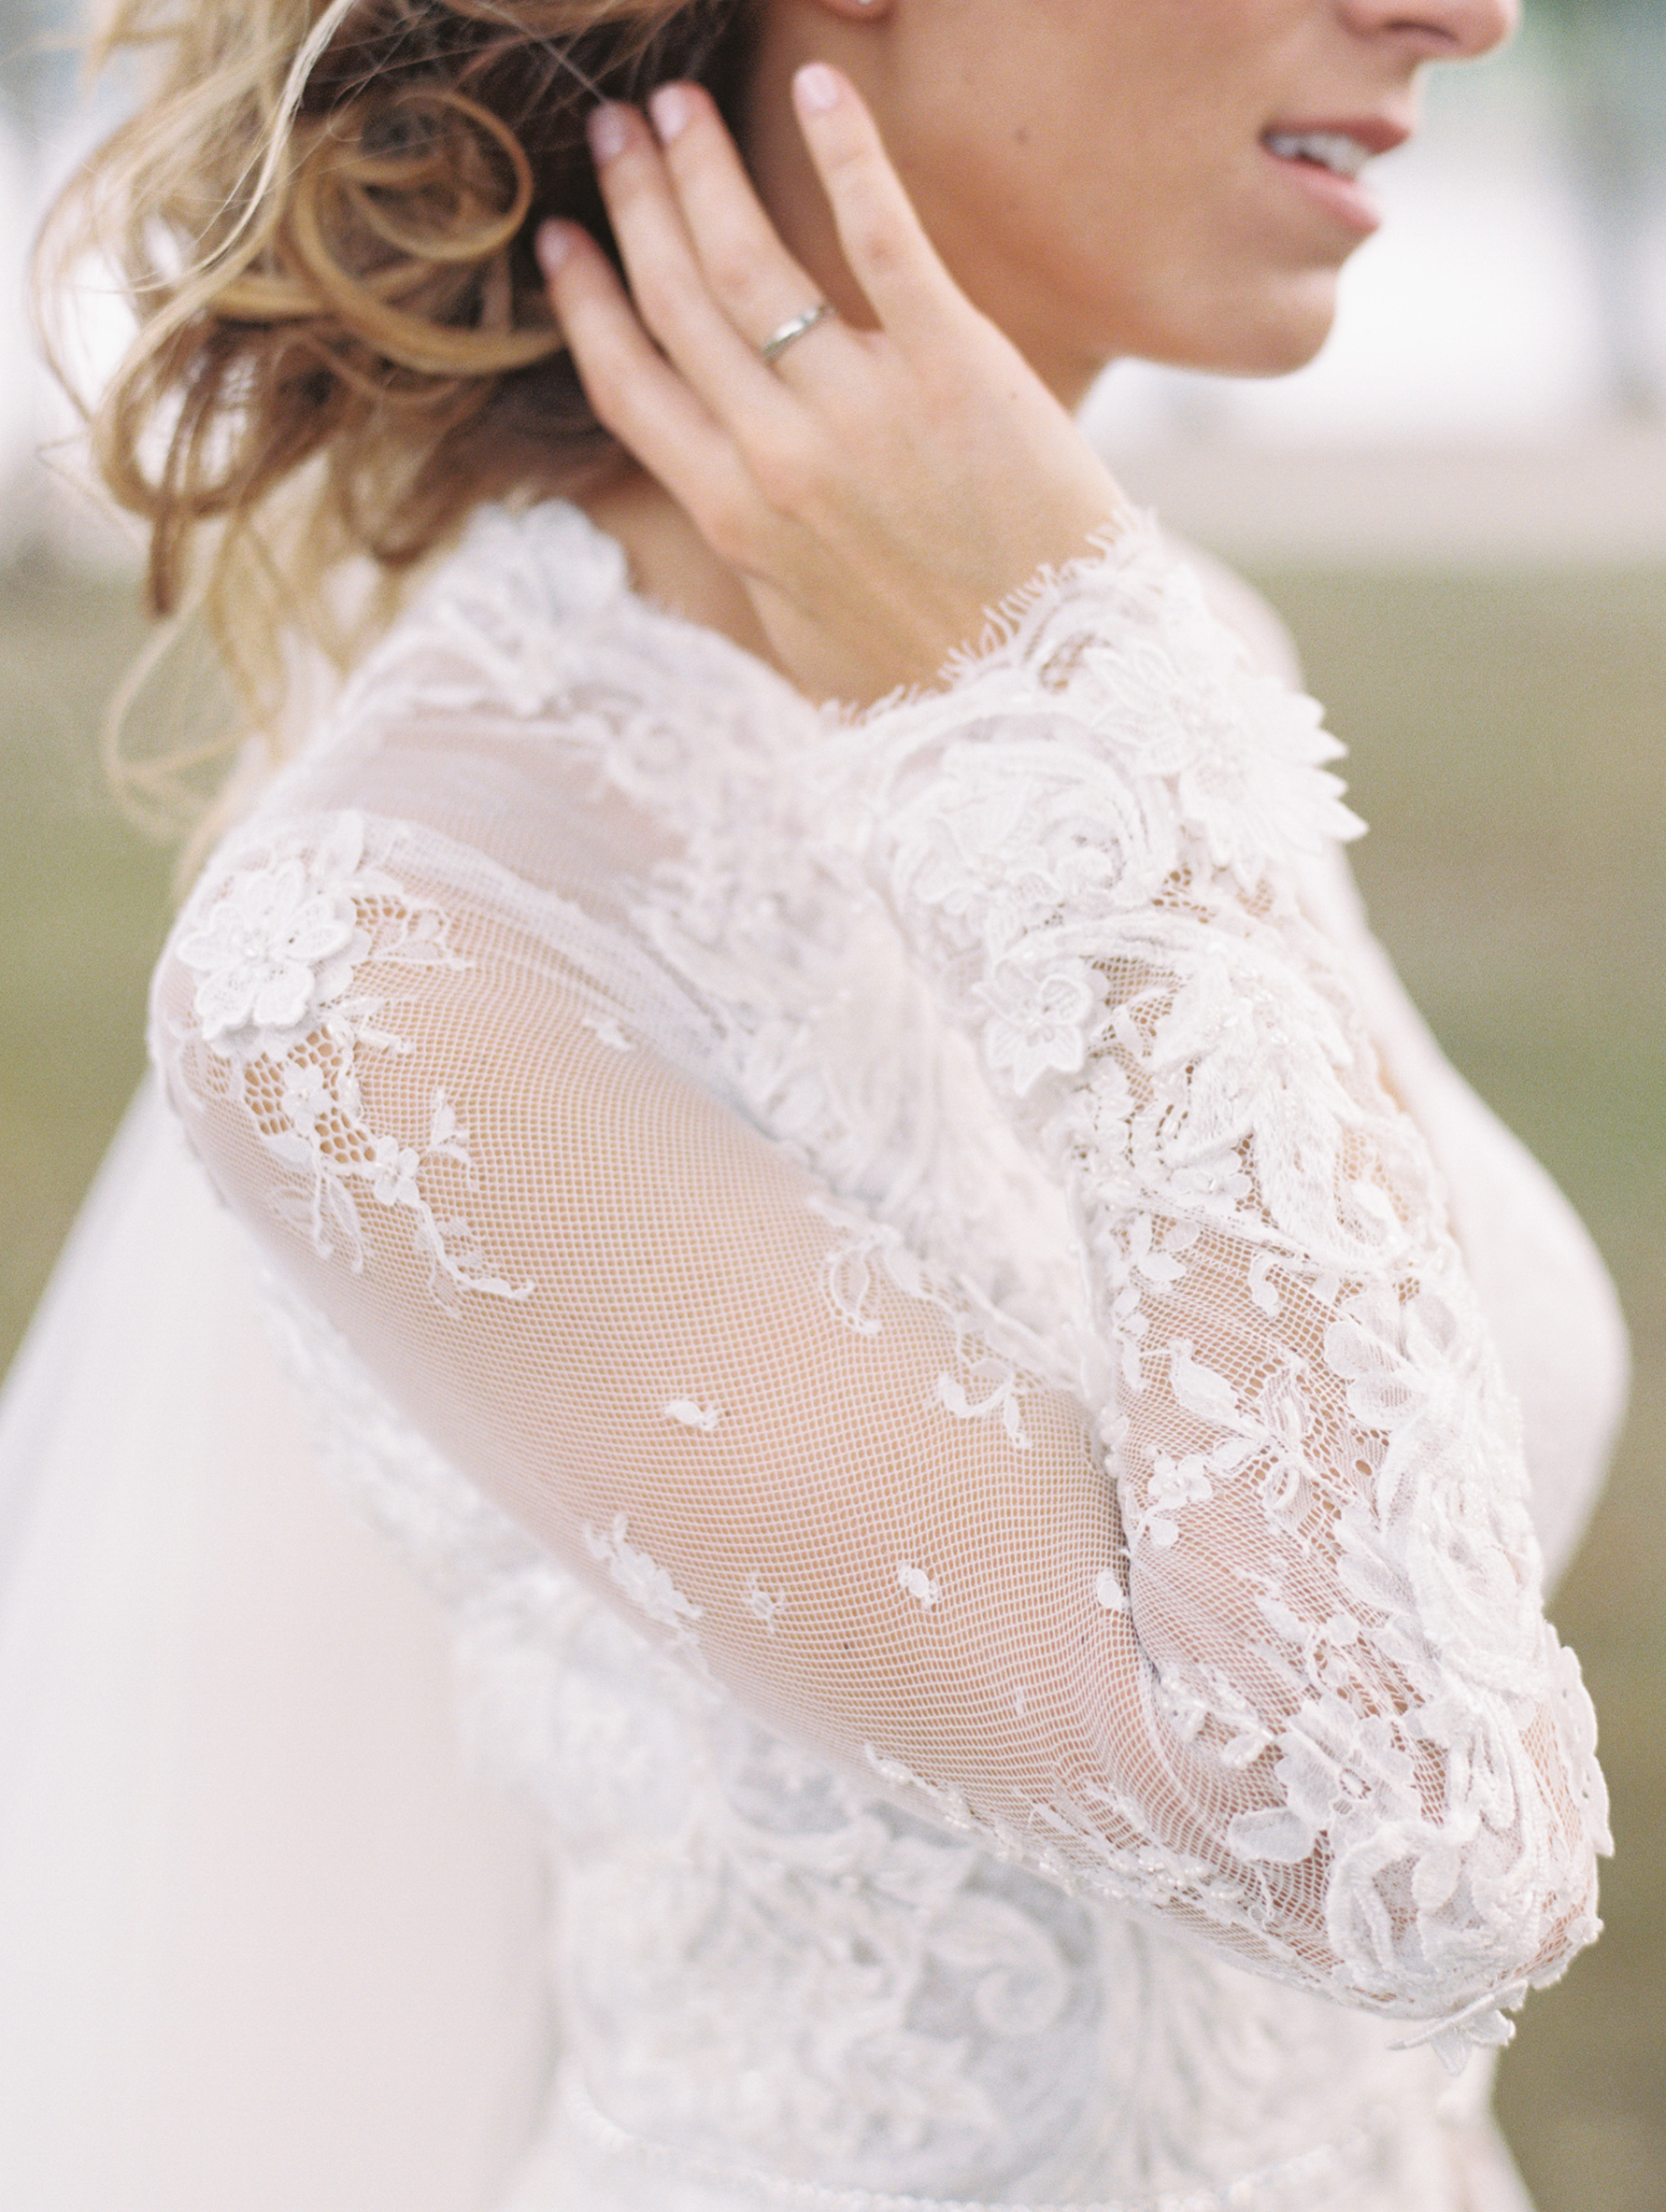 Photography: Lisa Ziesing with Abby Jiu Photography | Planning & Styling: Lauryn Prattes Styling and Events | Handmade Paper & Calligraphy: Spurlé Gul Studio | Gown: Berta Bridal